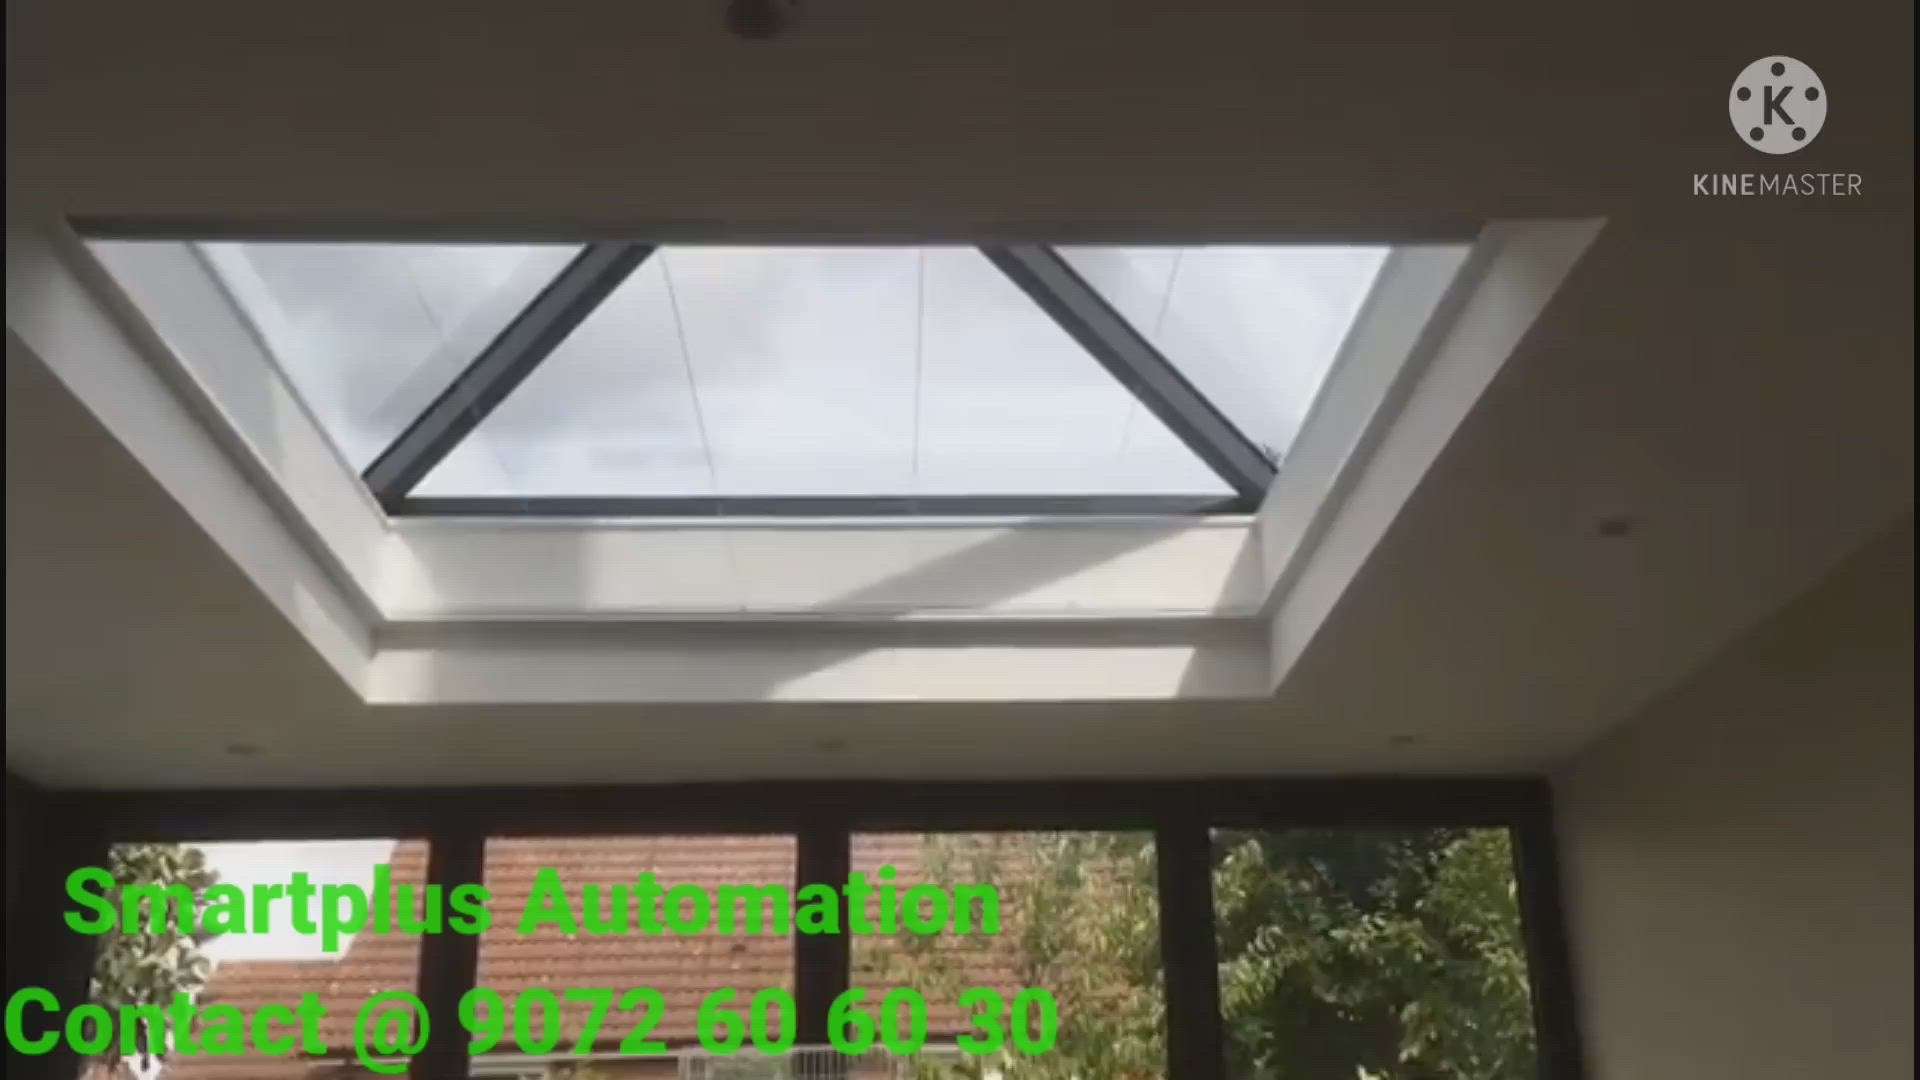 Remote control Skylight blinds
 #rooftop
 #remote skylight 
 #rooftop automation